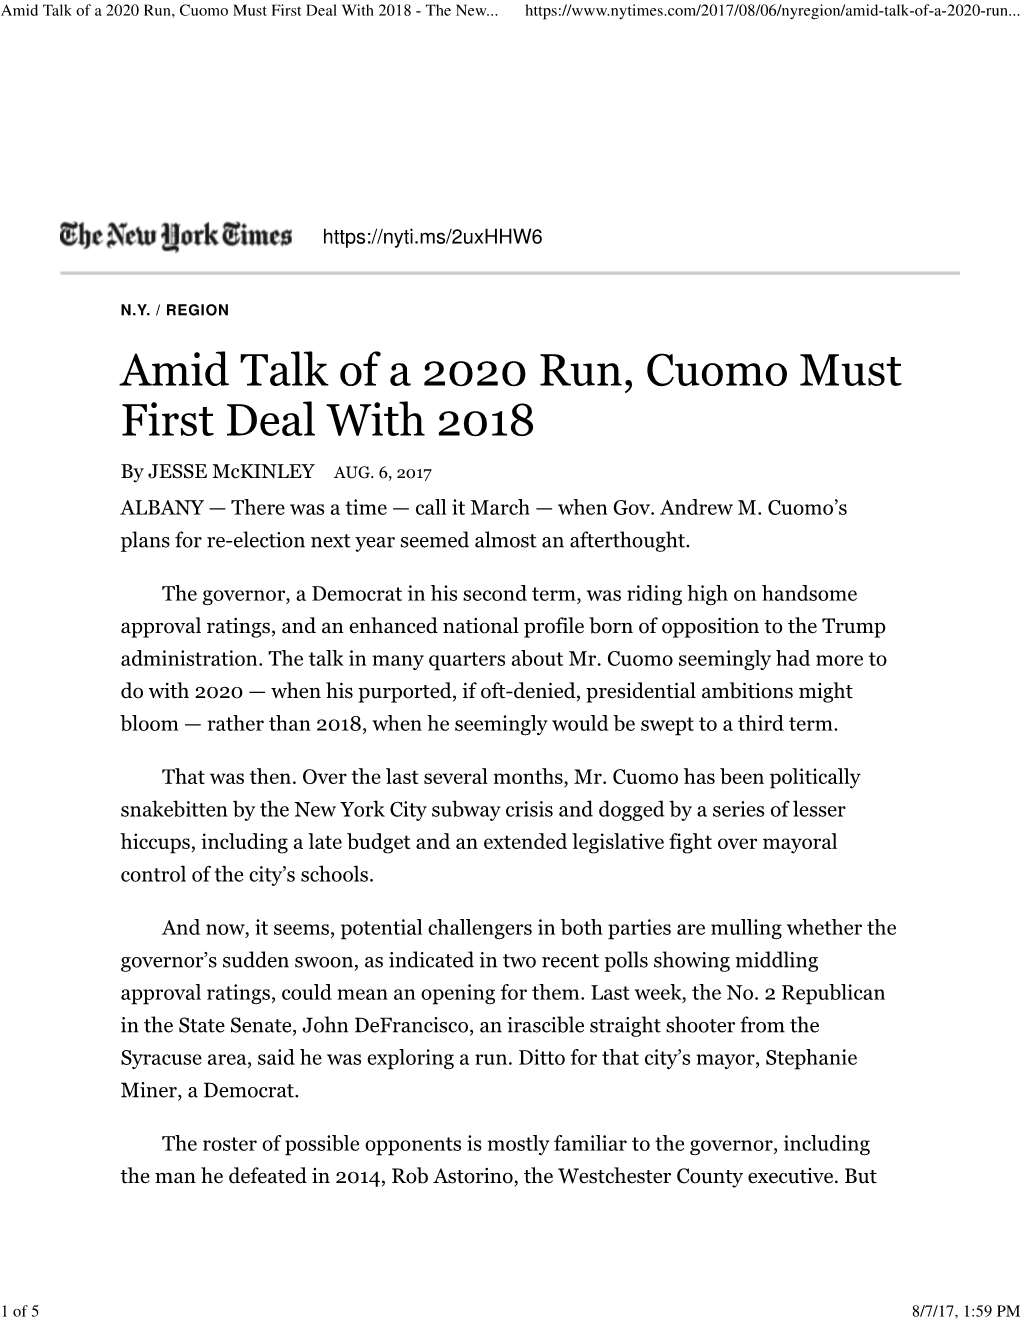 Amid Talk of a 2020 Run, Cuomo Must First Deal with 2018 - the New